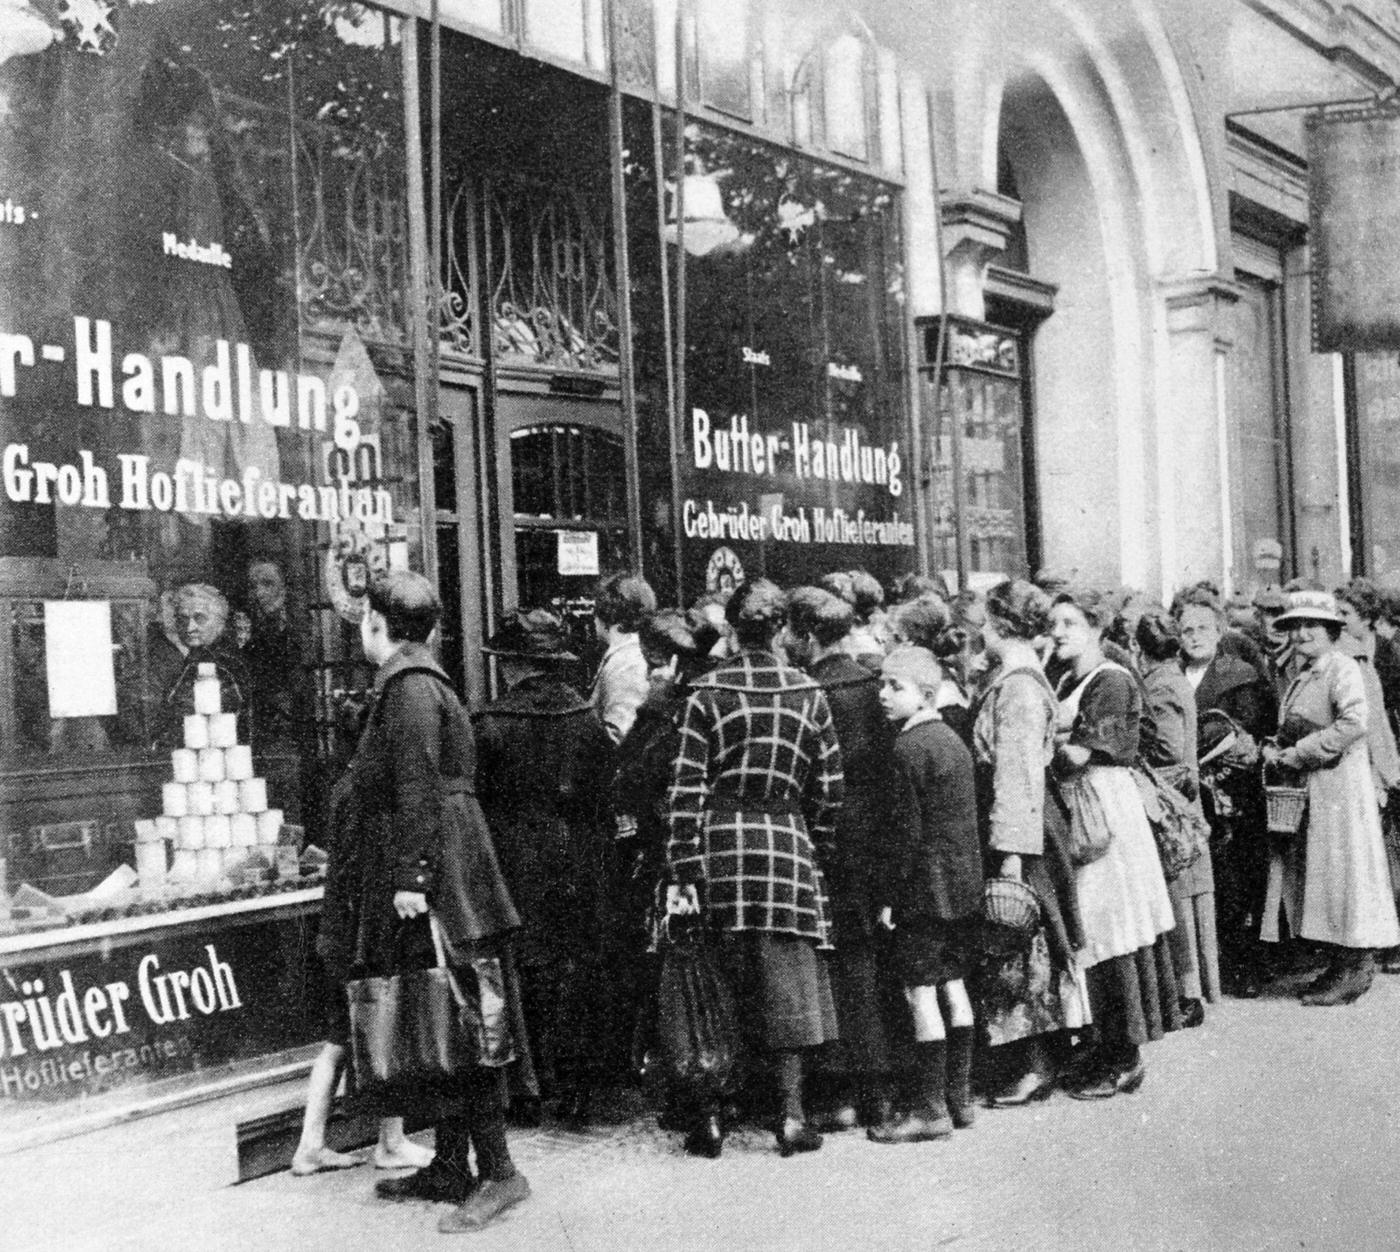 Queues for groceries during Weimar Germany's hyperinflation, 1923.